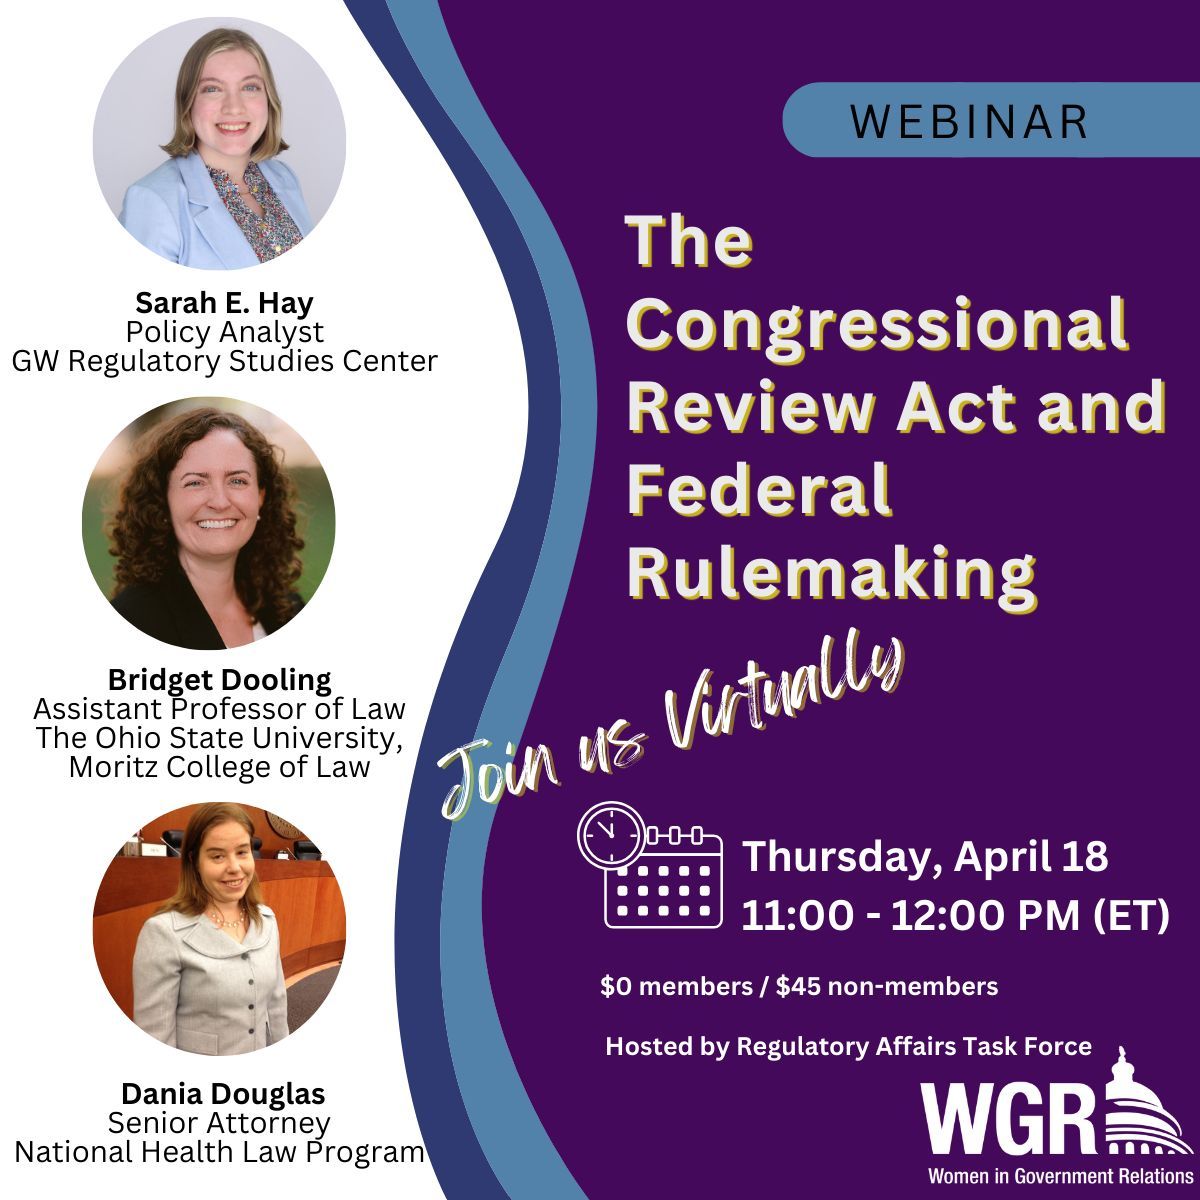 Tomorrow, April 18th, NHeLP's Dania Douglas will participate in the Women in Government Relations expert panel focused on key aspects of the Congressional Review Act (CRA) and its potential impact on future policymaking. wgr.org/events/EventDe…